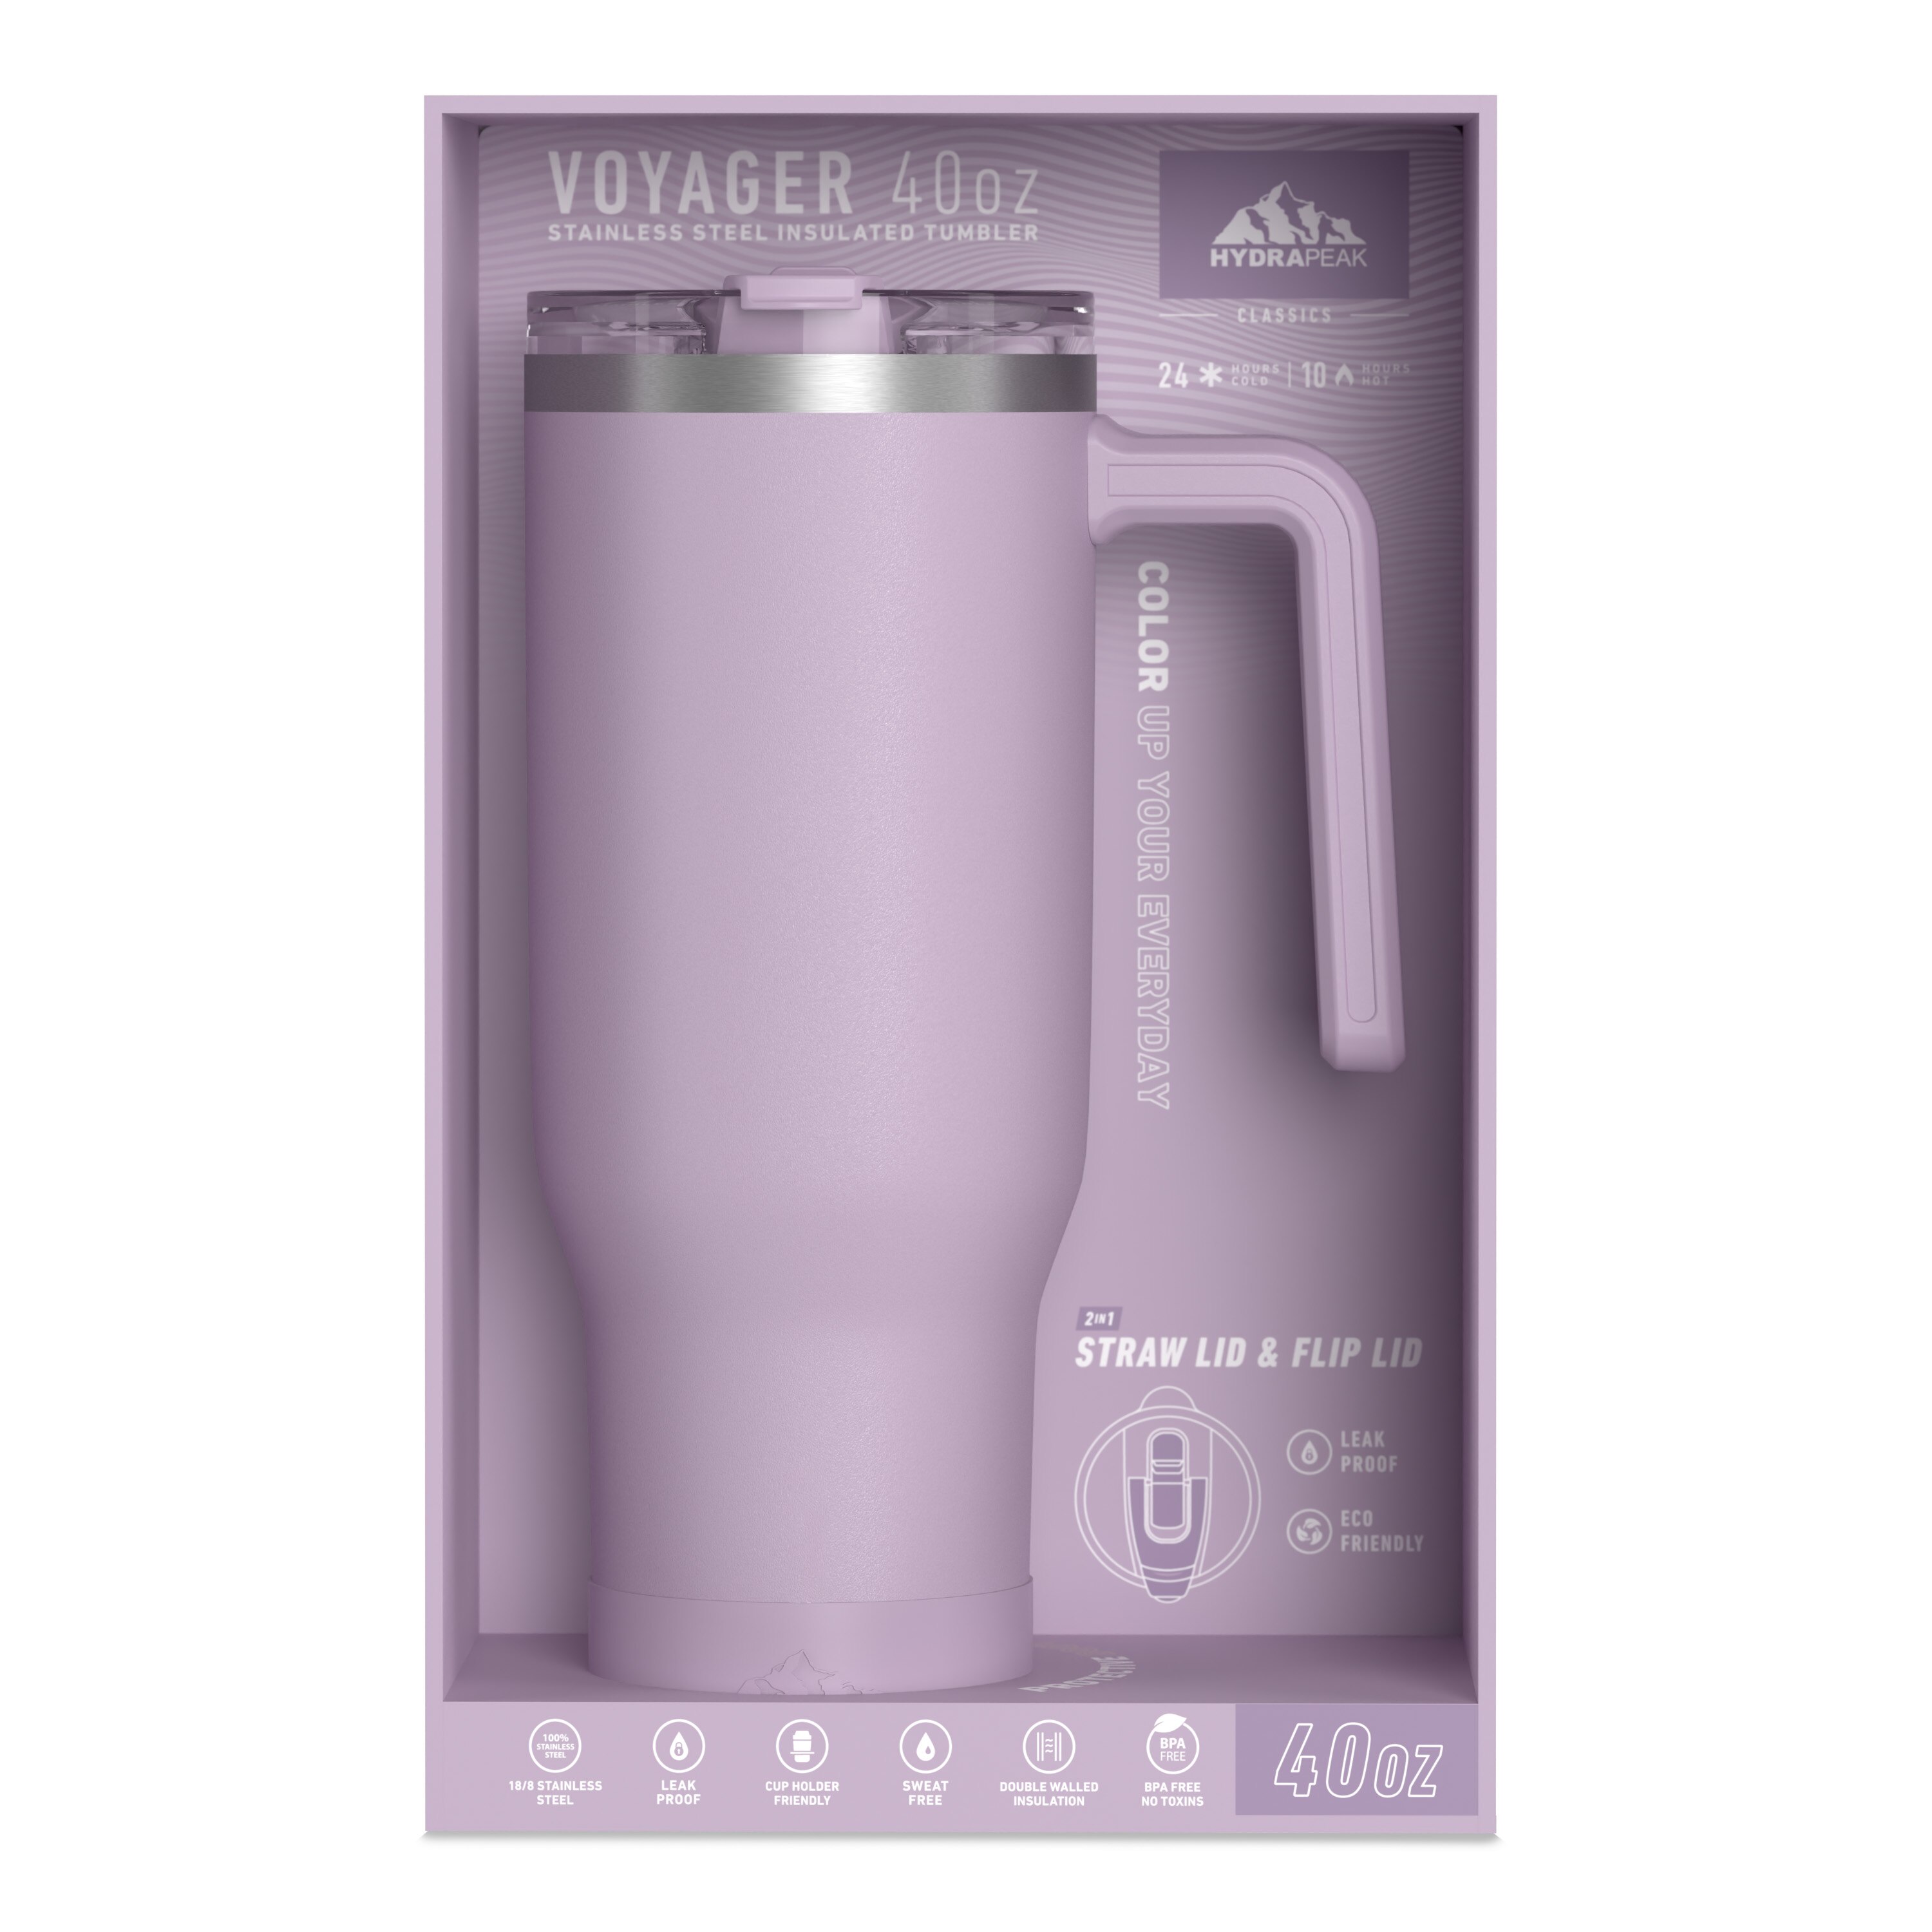 40 oz Insulated Tumbler – Challenger Aviation Products, Inc.